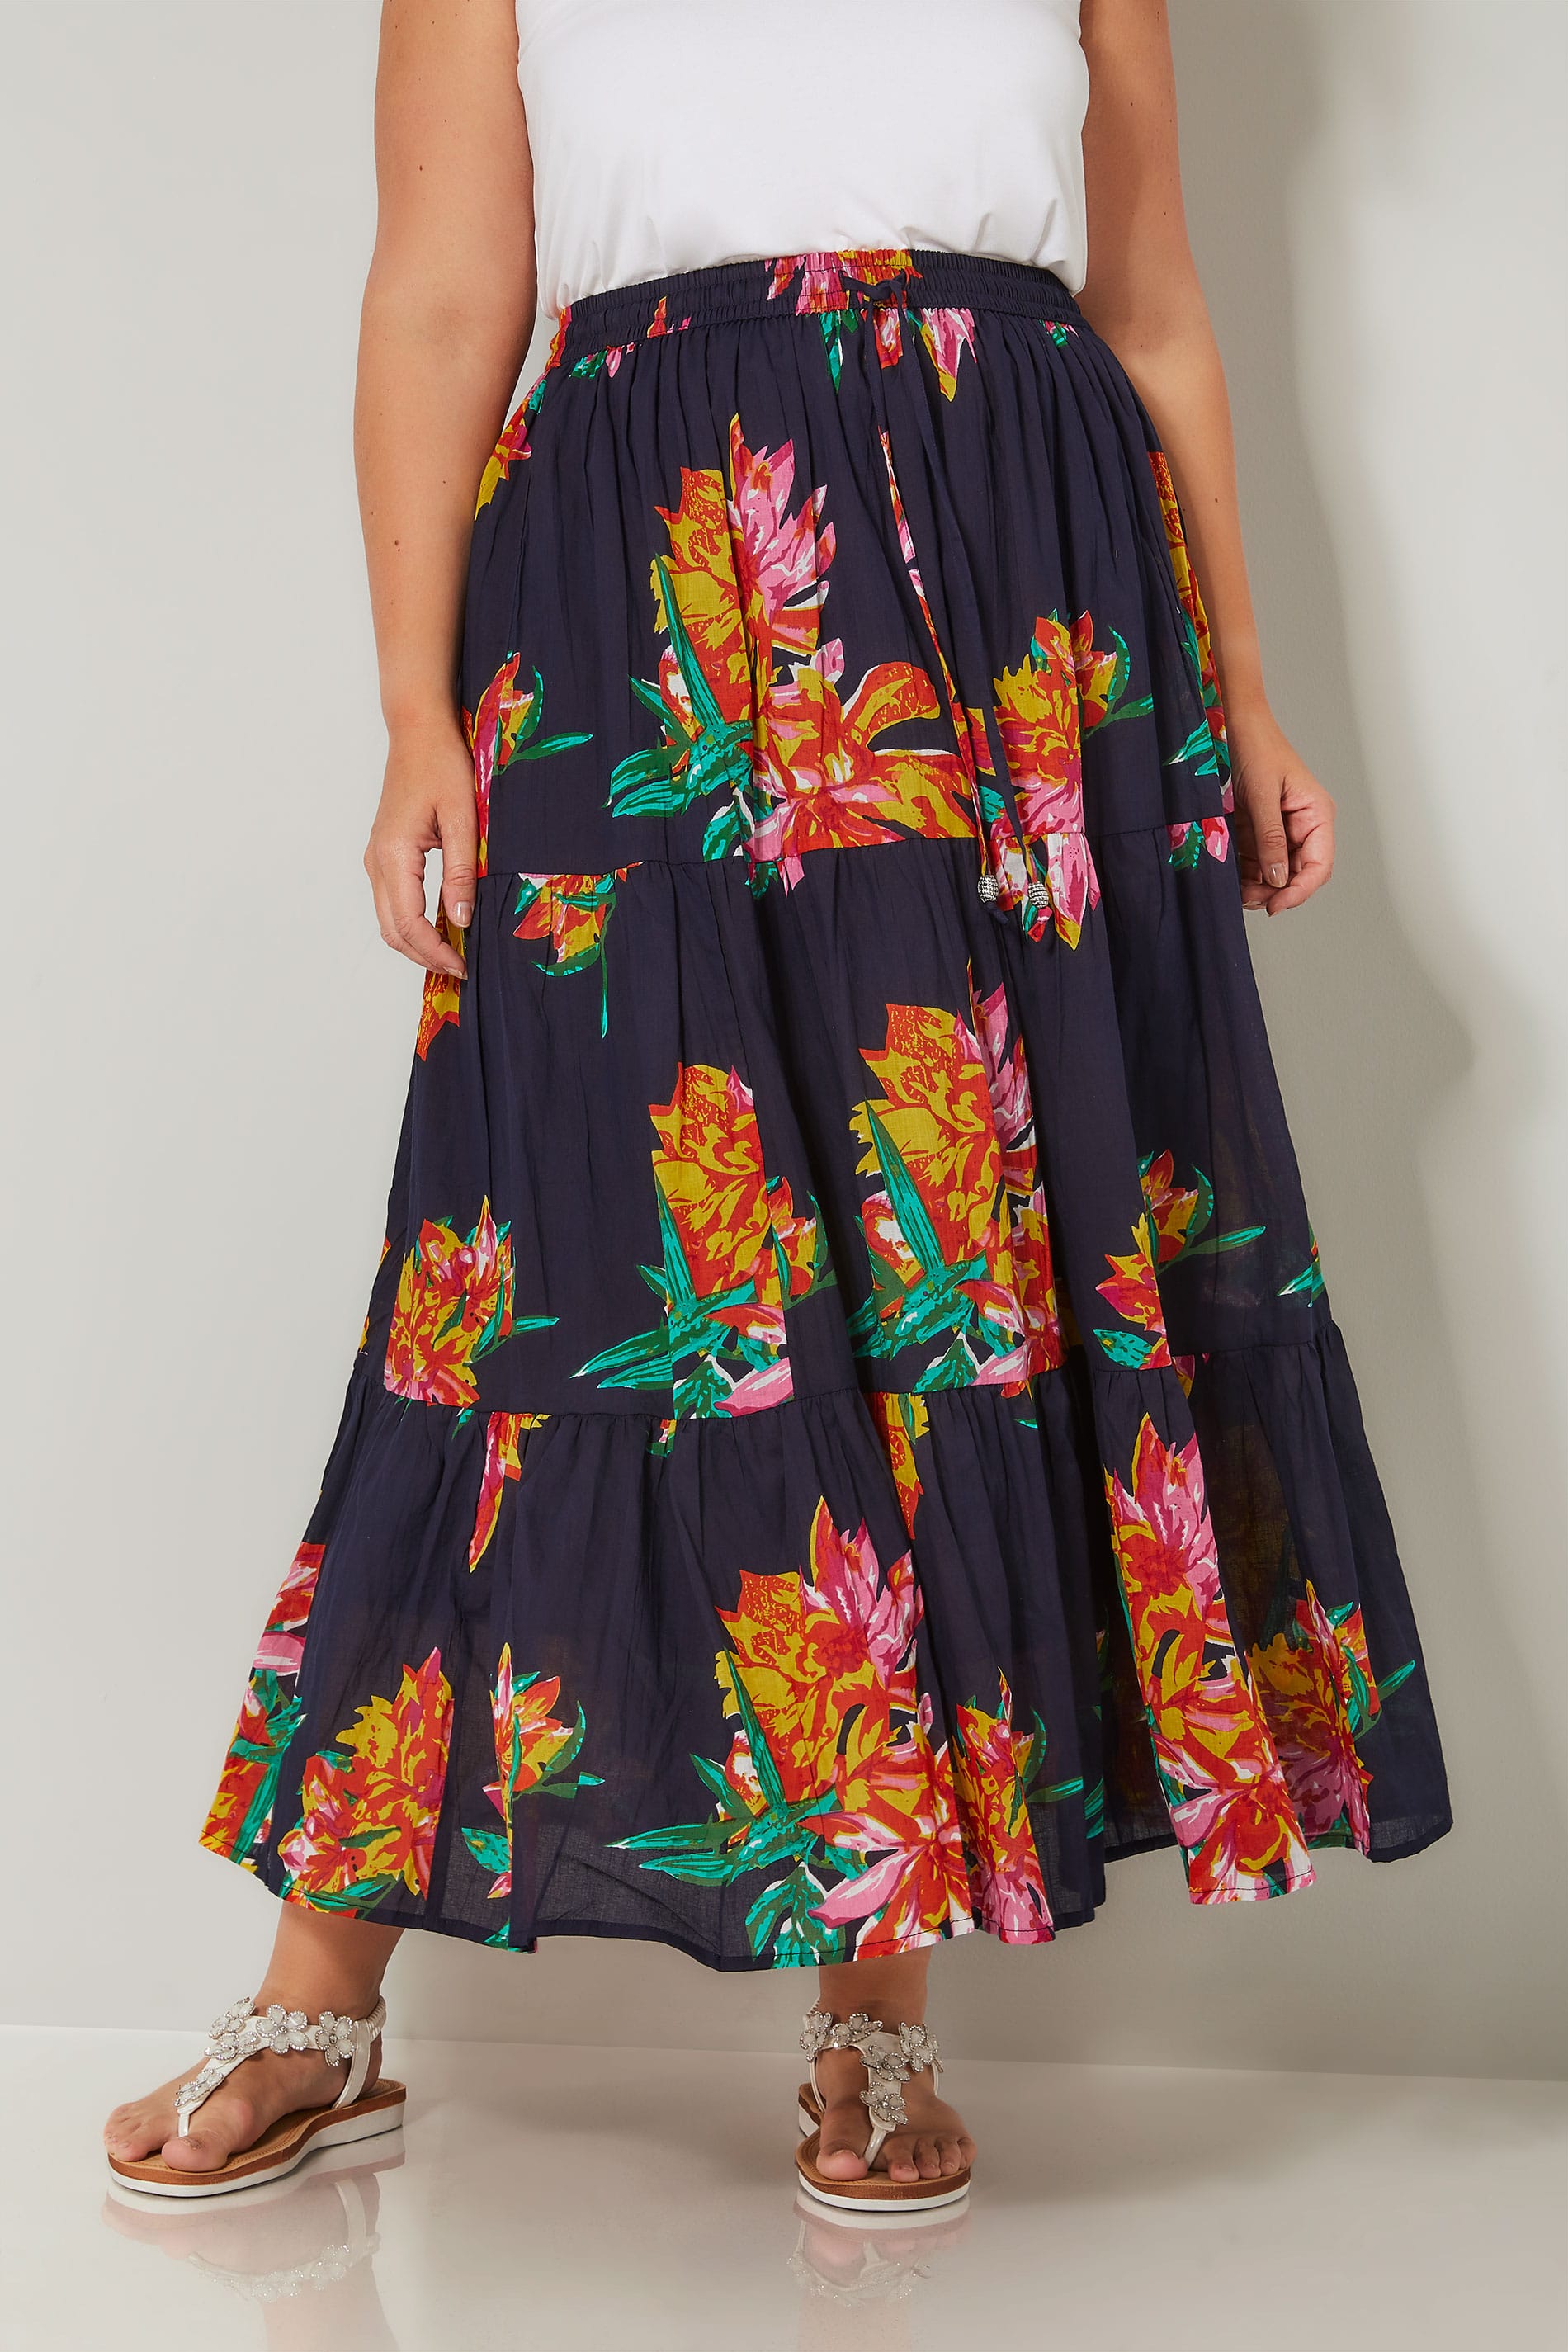 Navy & Multi Floral Print Tiered Maxi Skirt, plus size 16 to 36